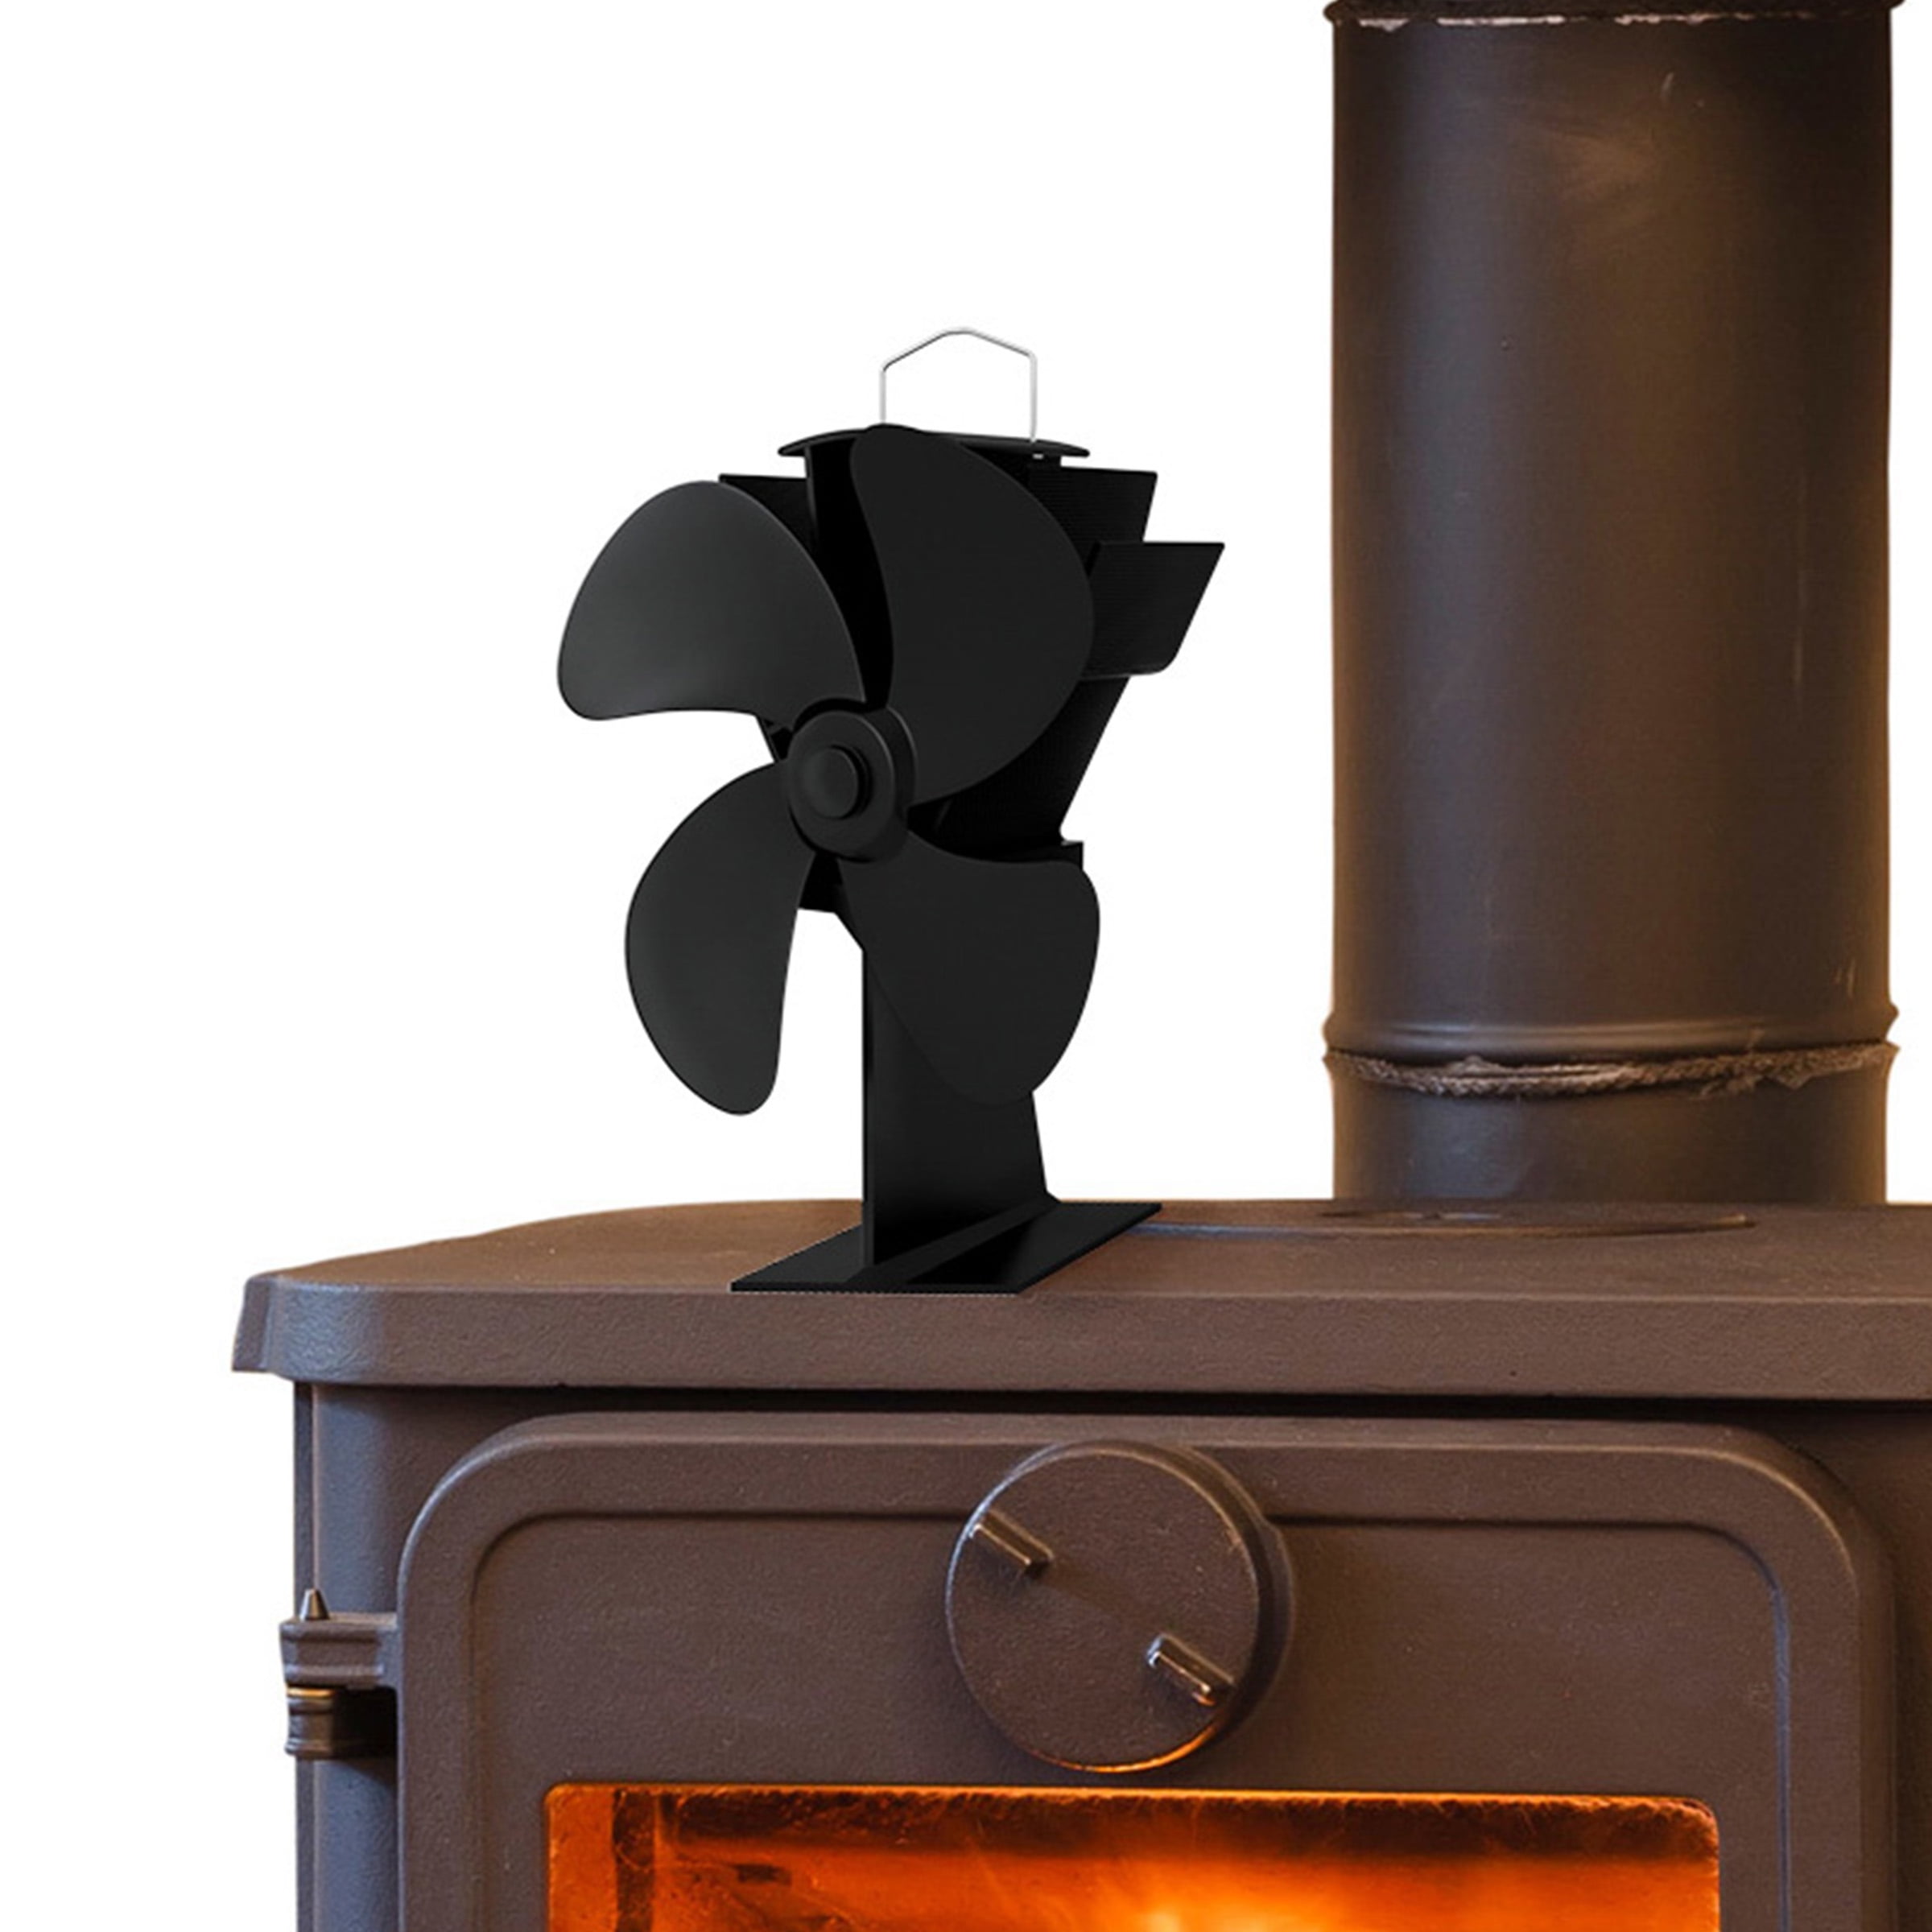 for Wood Stove/Pellet/Log Burner/Fireplace Wood Stove Fan JIGUOOR 5 Blades Fireplace Fan Heat Powered Stove Fan with Designed Silent Operation Circulating Warm Air Saving Fuel Efficiently